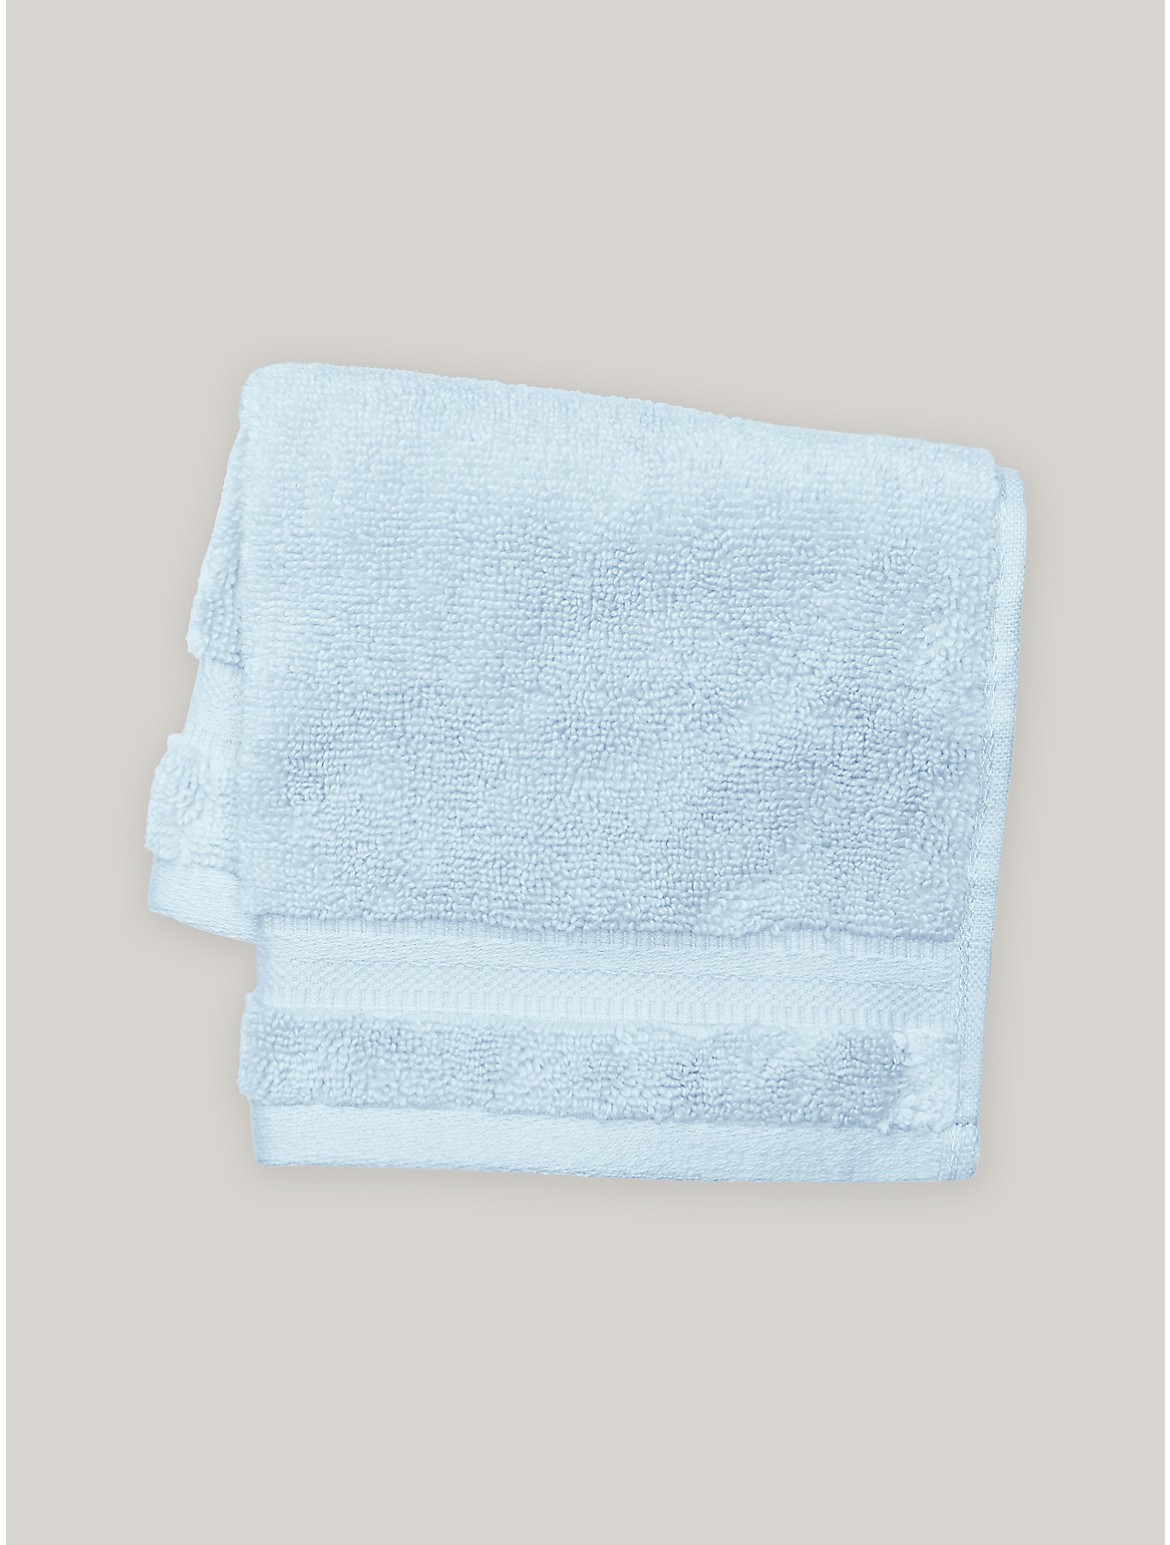 Tommy Hilfiger Signature Solid Washcloth in Cashmere Blue - Blue